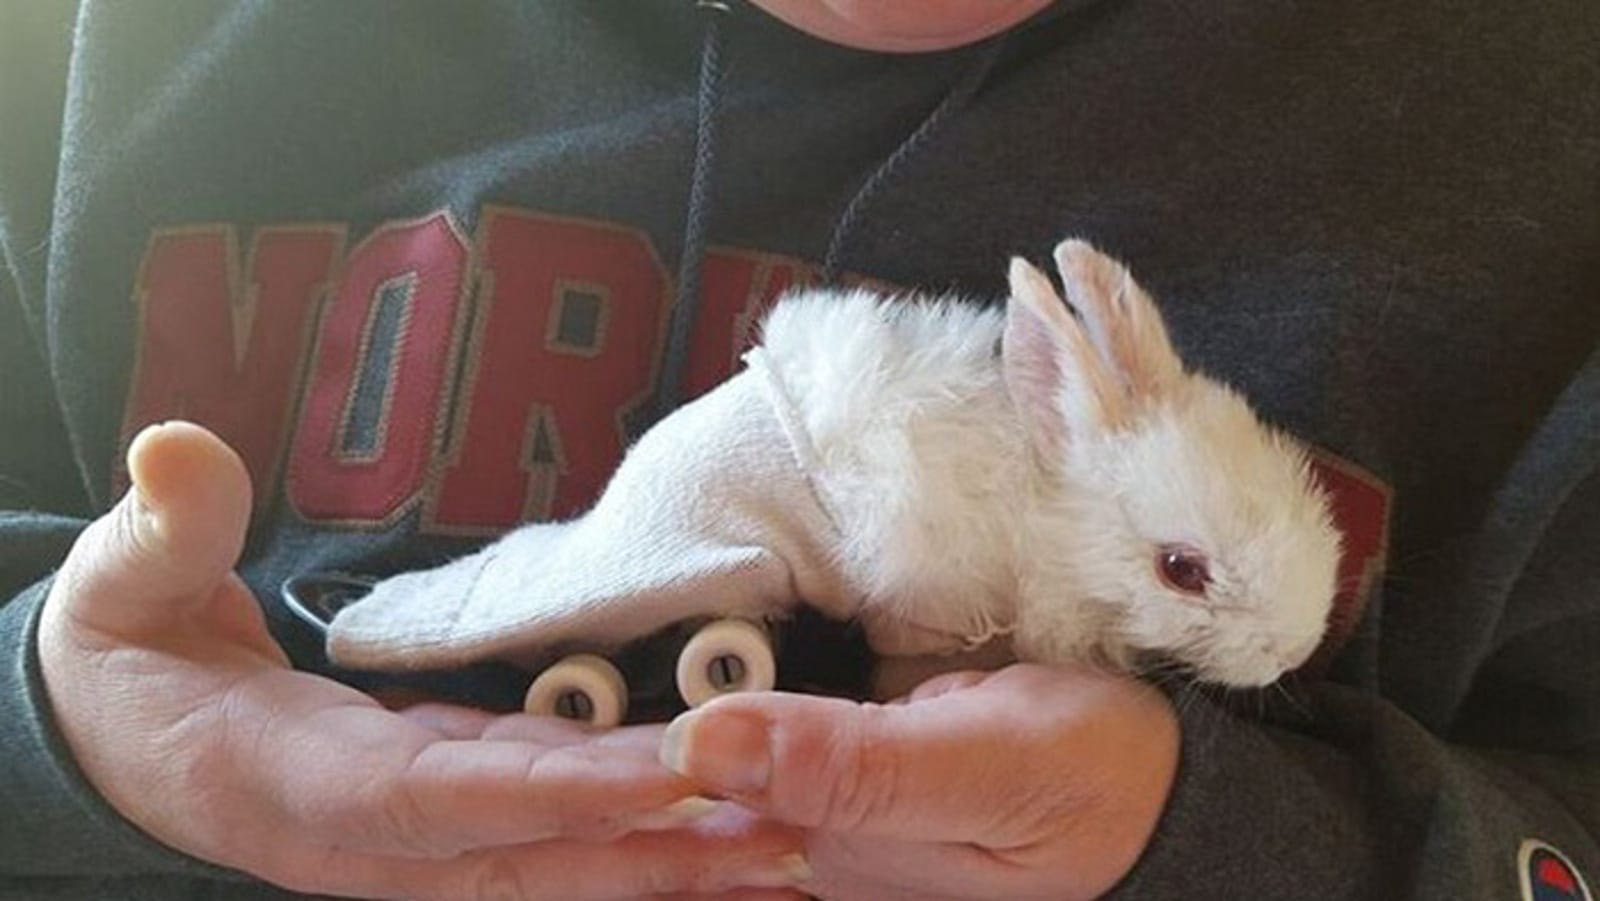 This Viral Bunny Video Has a Tragic Dark Side: The Truth About Wheelz, the Skateboarding Rabbit